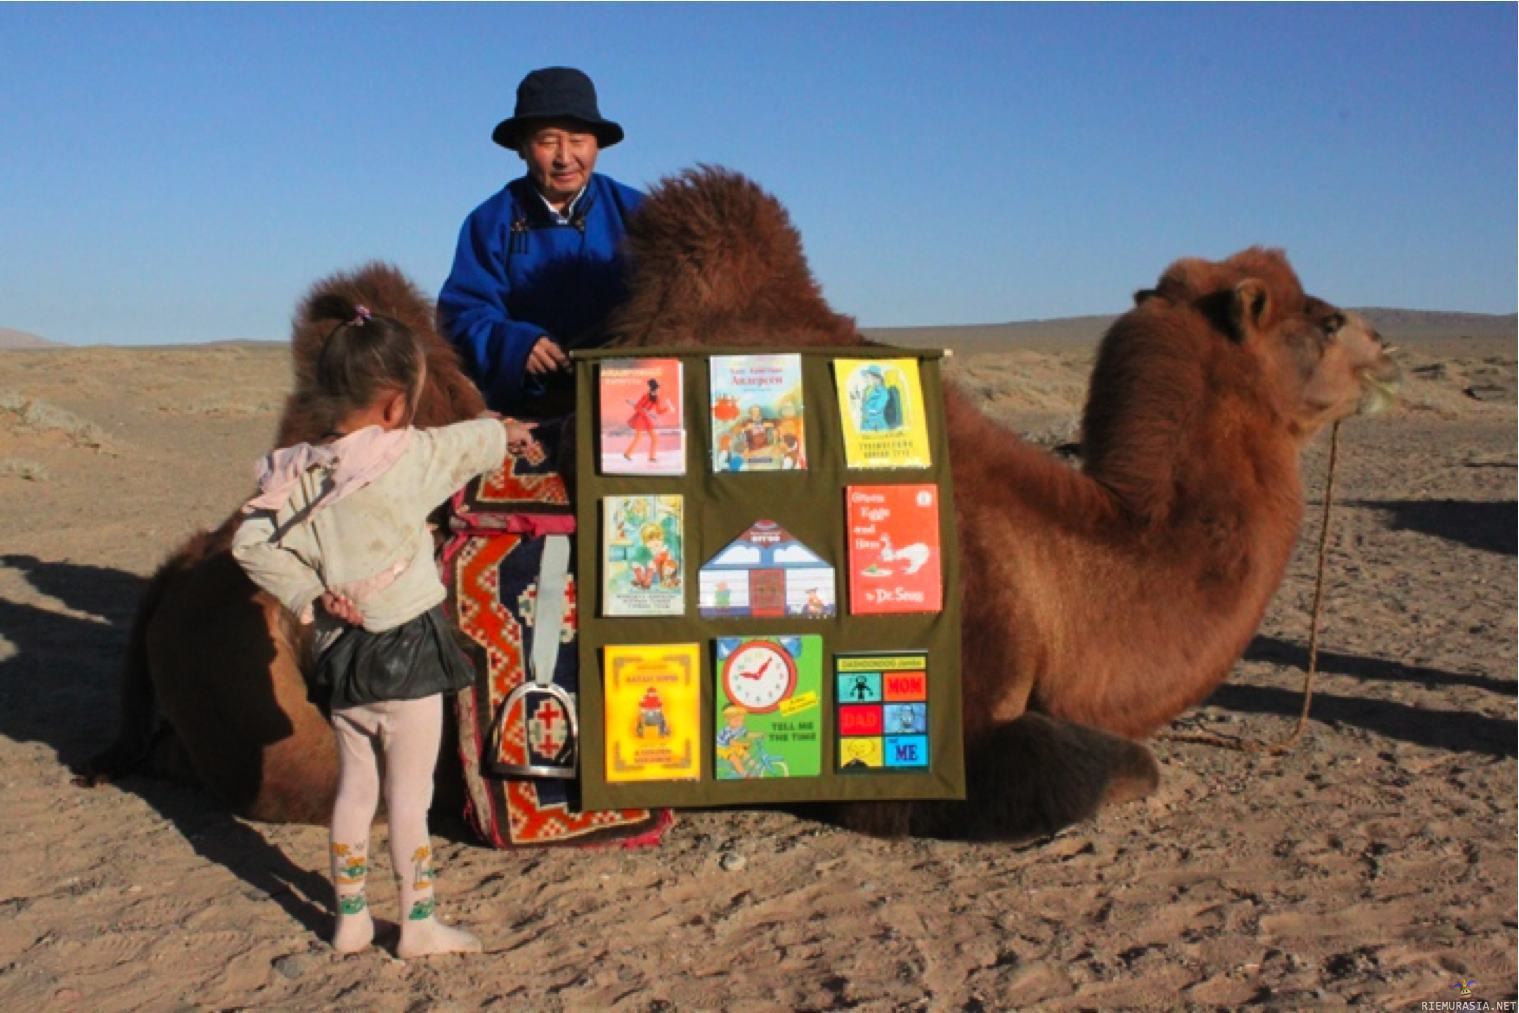 Traveling camel library in the Gobi Desert. His name is Dashdondog Jamba. He's a Mongolian writer, poet, librarian, translator and storyteller who has dedicated his life to making sure that children in Mongolia have access to books.